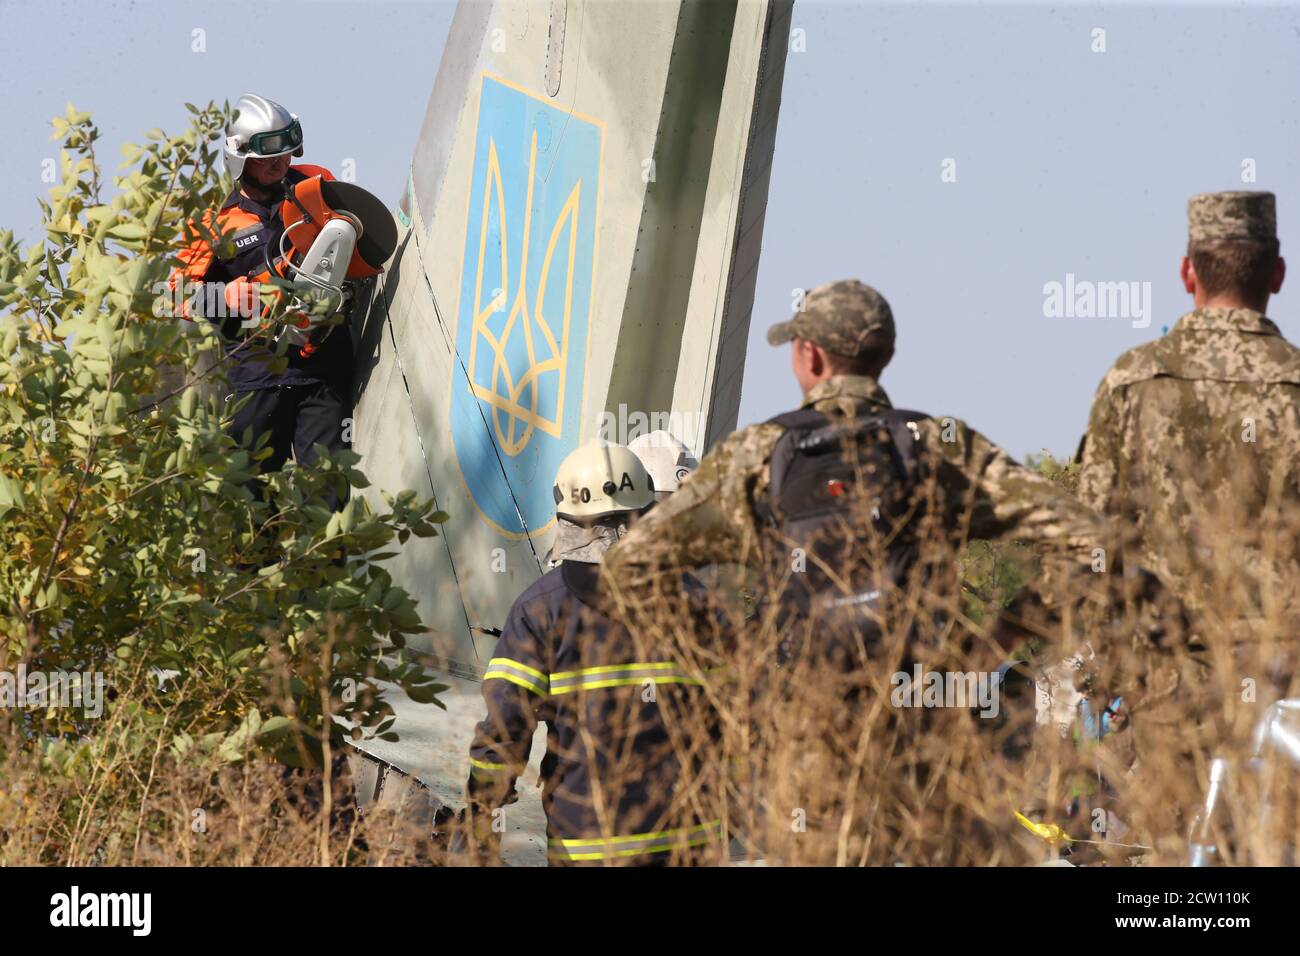 (200926) -- KHARKIV, Sept. 26, 2020 (Xinhua) -- Rescuers cut the wreckage of the crashed An-26 military aircraft in Chuguev, Kharkiv region, Ukraine, Sept. 26, 2020. The death toll from the Ukrainian military plane crash rose to 26, after one of the two people with serious condition died in hospital, the State Emergency Service of Ukraine said on Saturday. The An-26 military aircraft with 27 people on board crashed on Friday. The plane was performing a training flight and was landing at the airfield of a military base near the city of Chuguev, Kharkiv region. (Photo by Sergey Starostenko/Xi Stock Photo